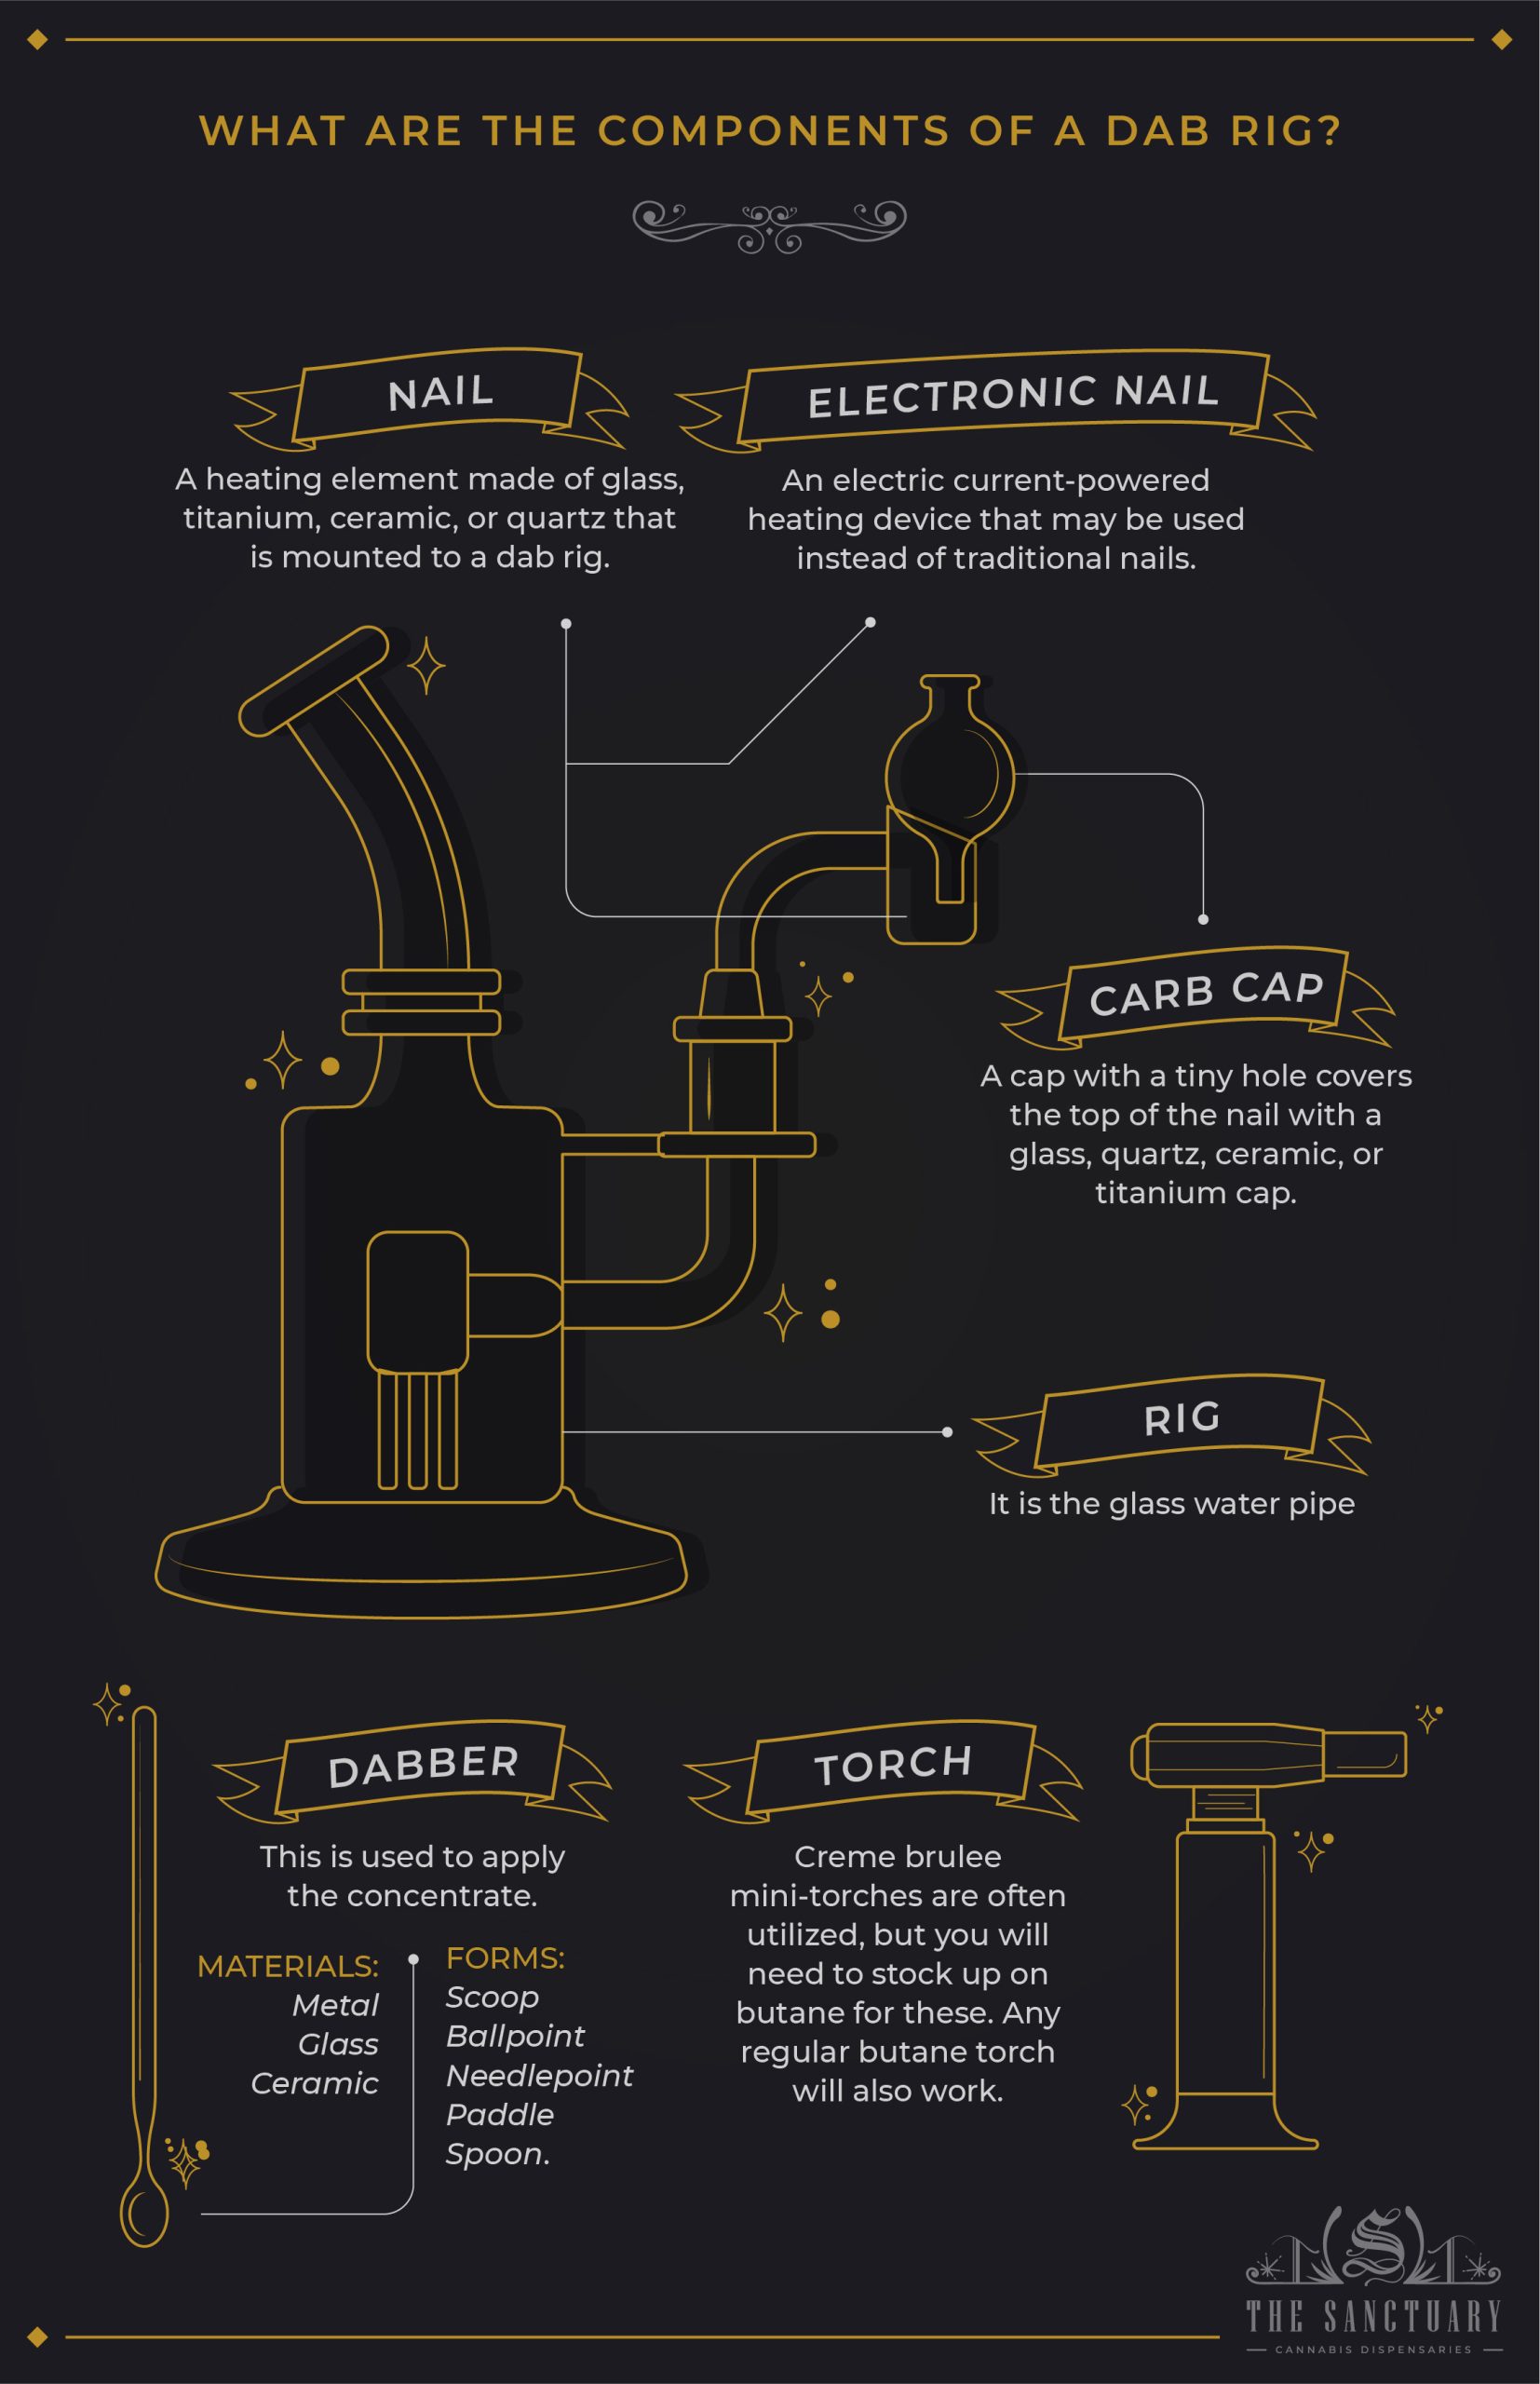 What are the components of a dab rig